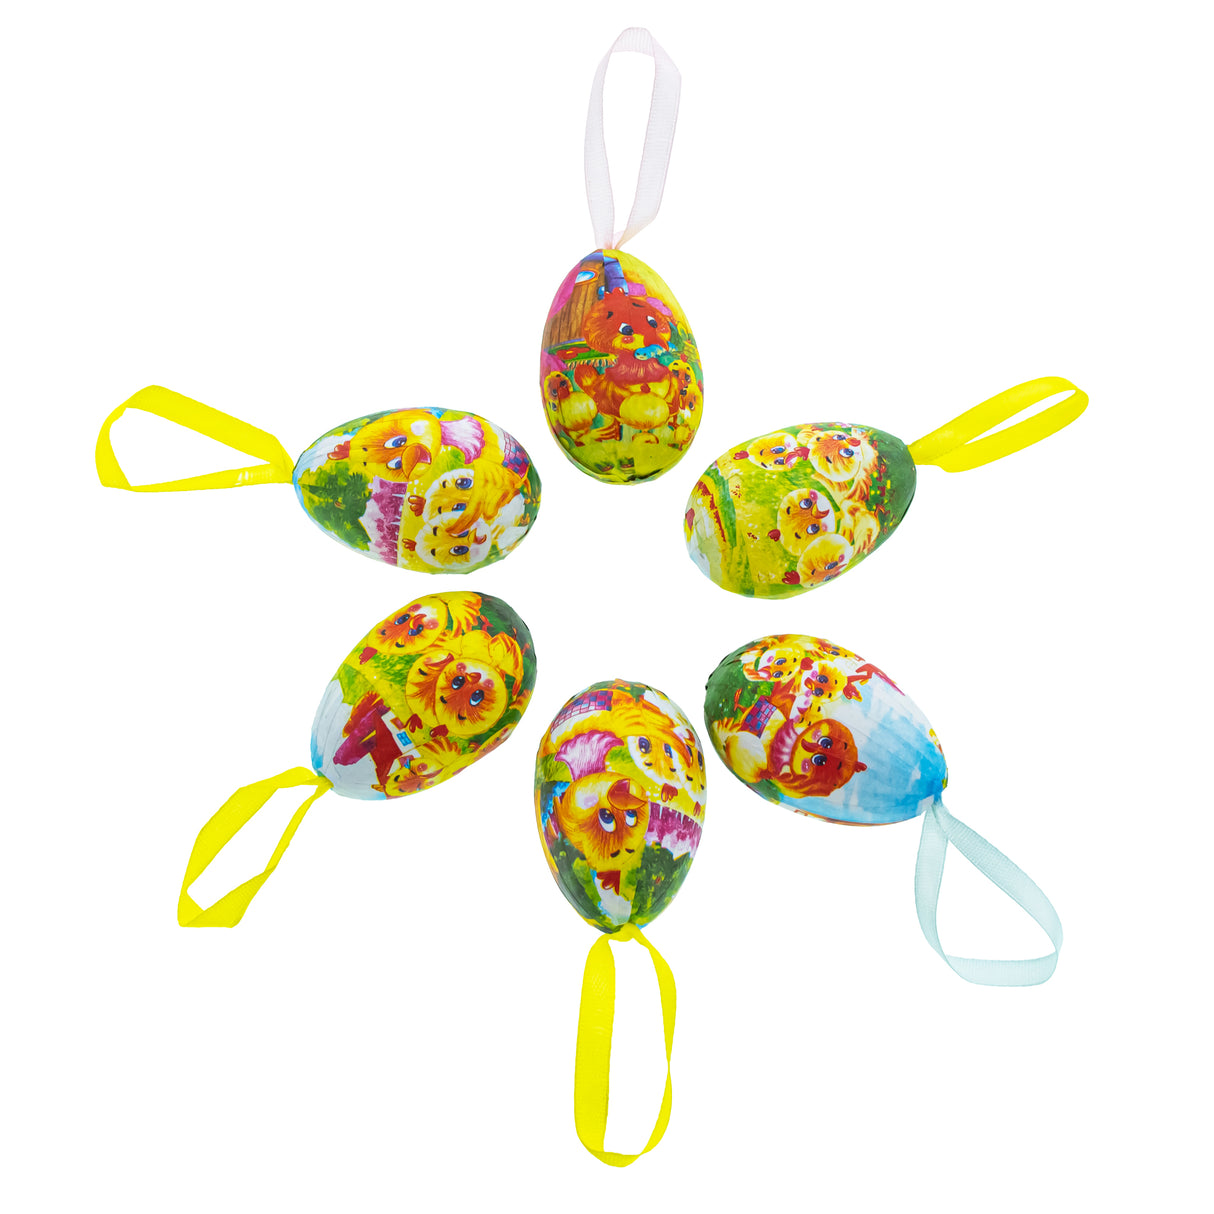 Chirpy Easter: Set of 6 Chicks Easter Egg Ornaments in Multi color, Oval shape